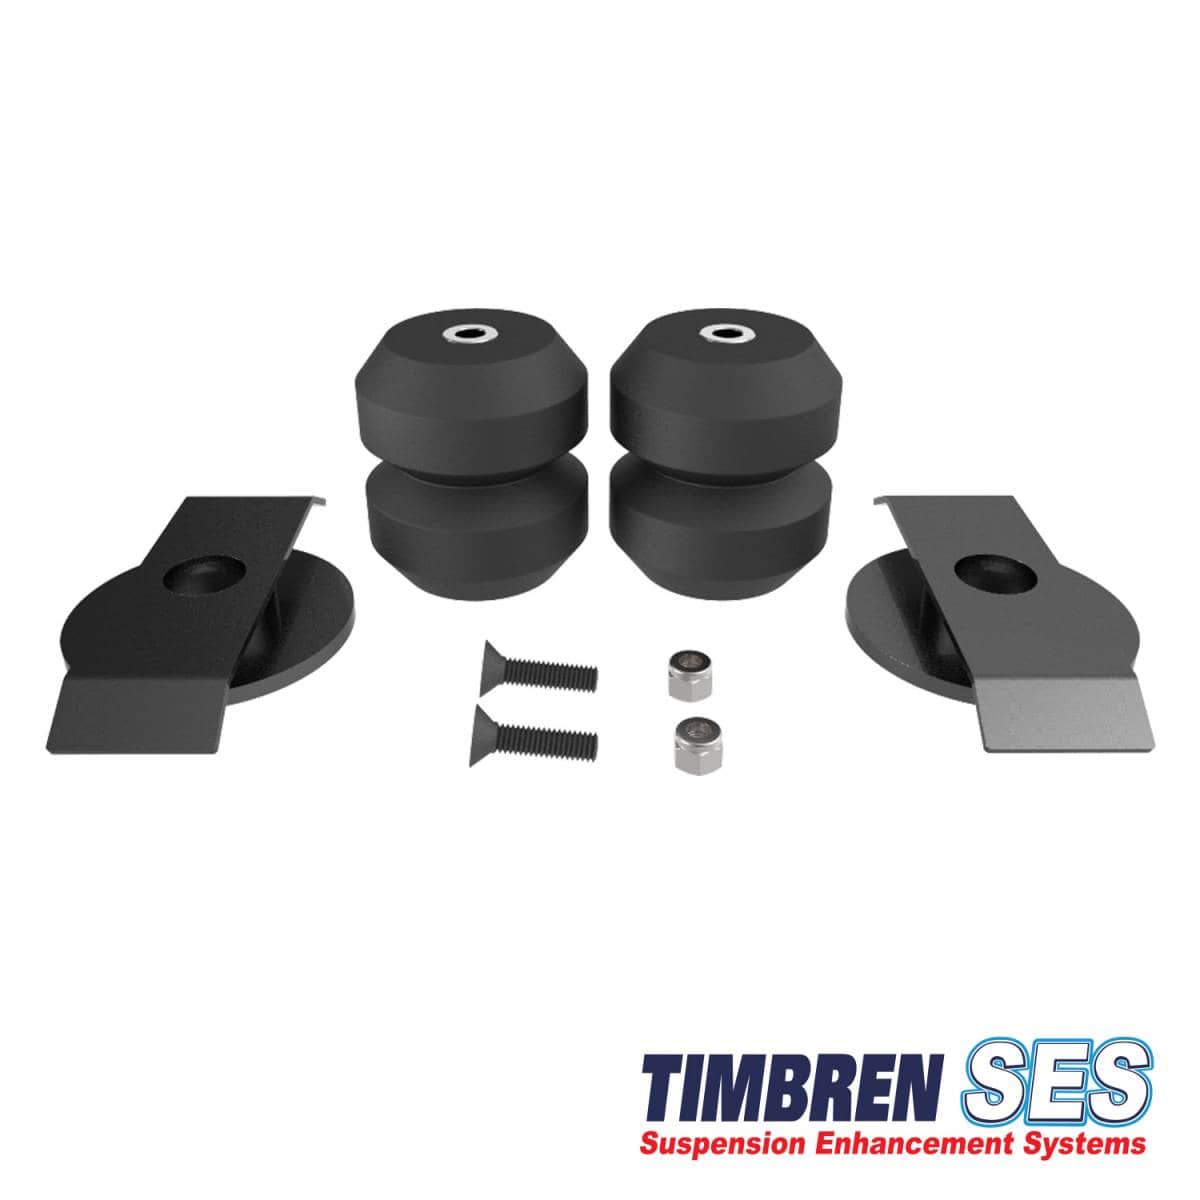 Timbren SES Suspension Enhancement System for 05-21 Frontier and 05-21 Tacoma (Rear)